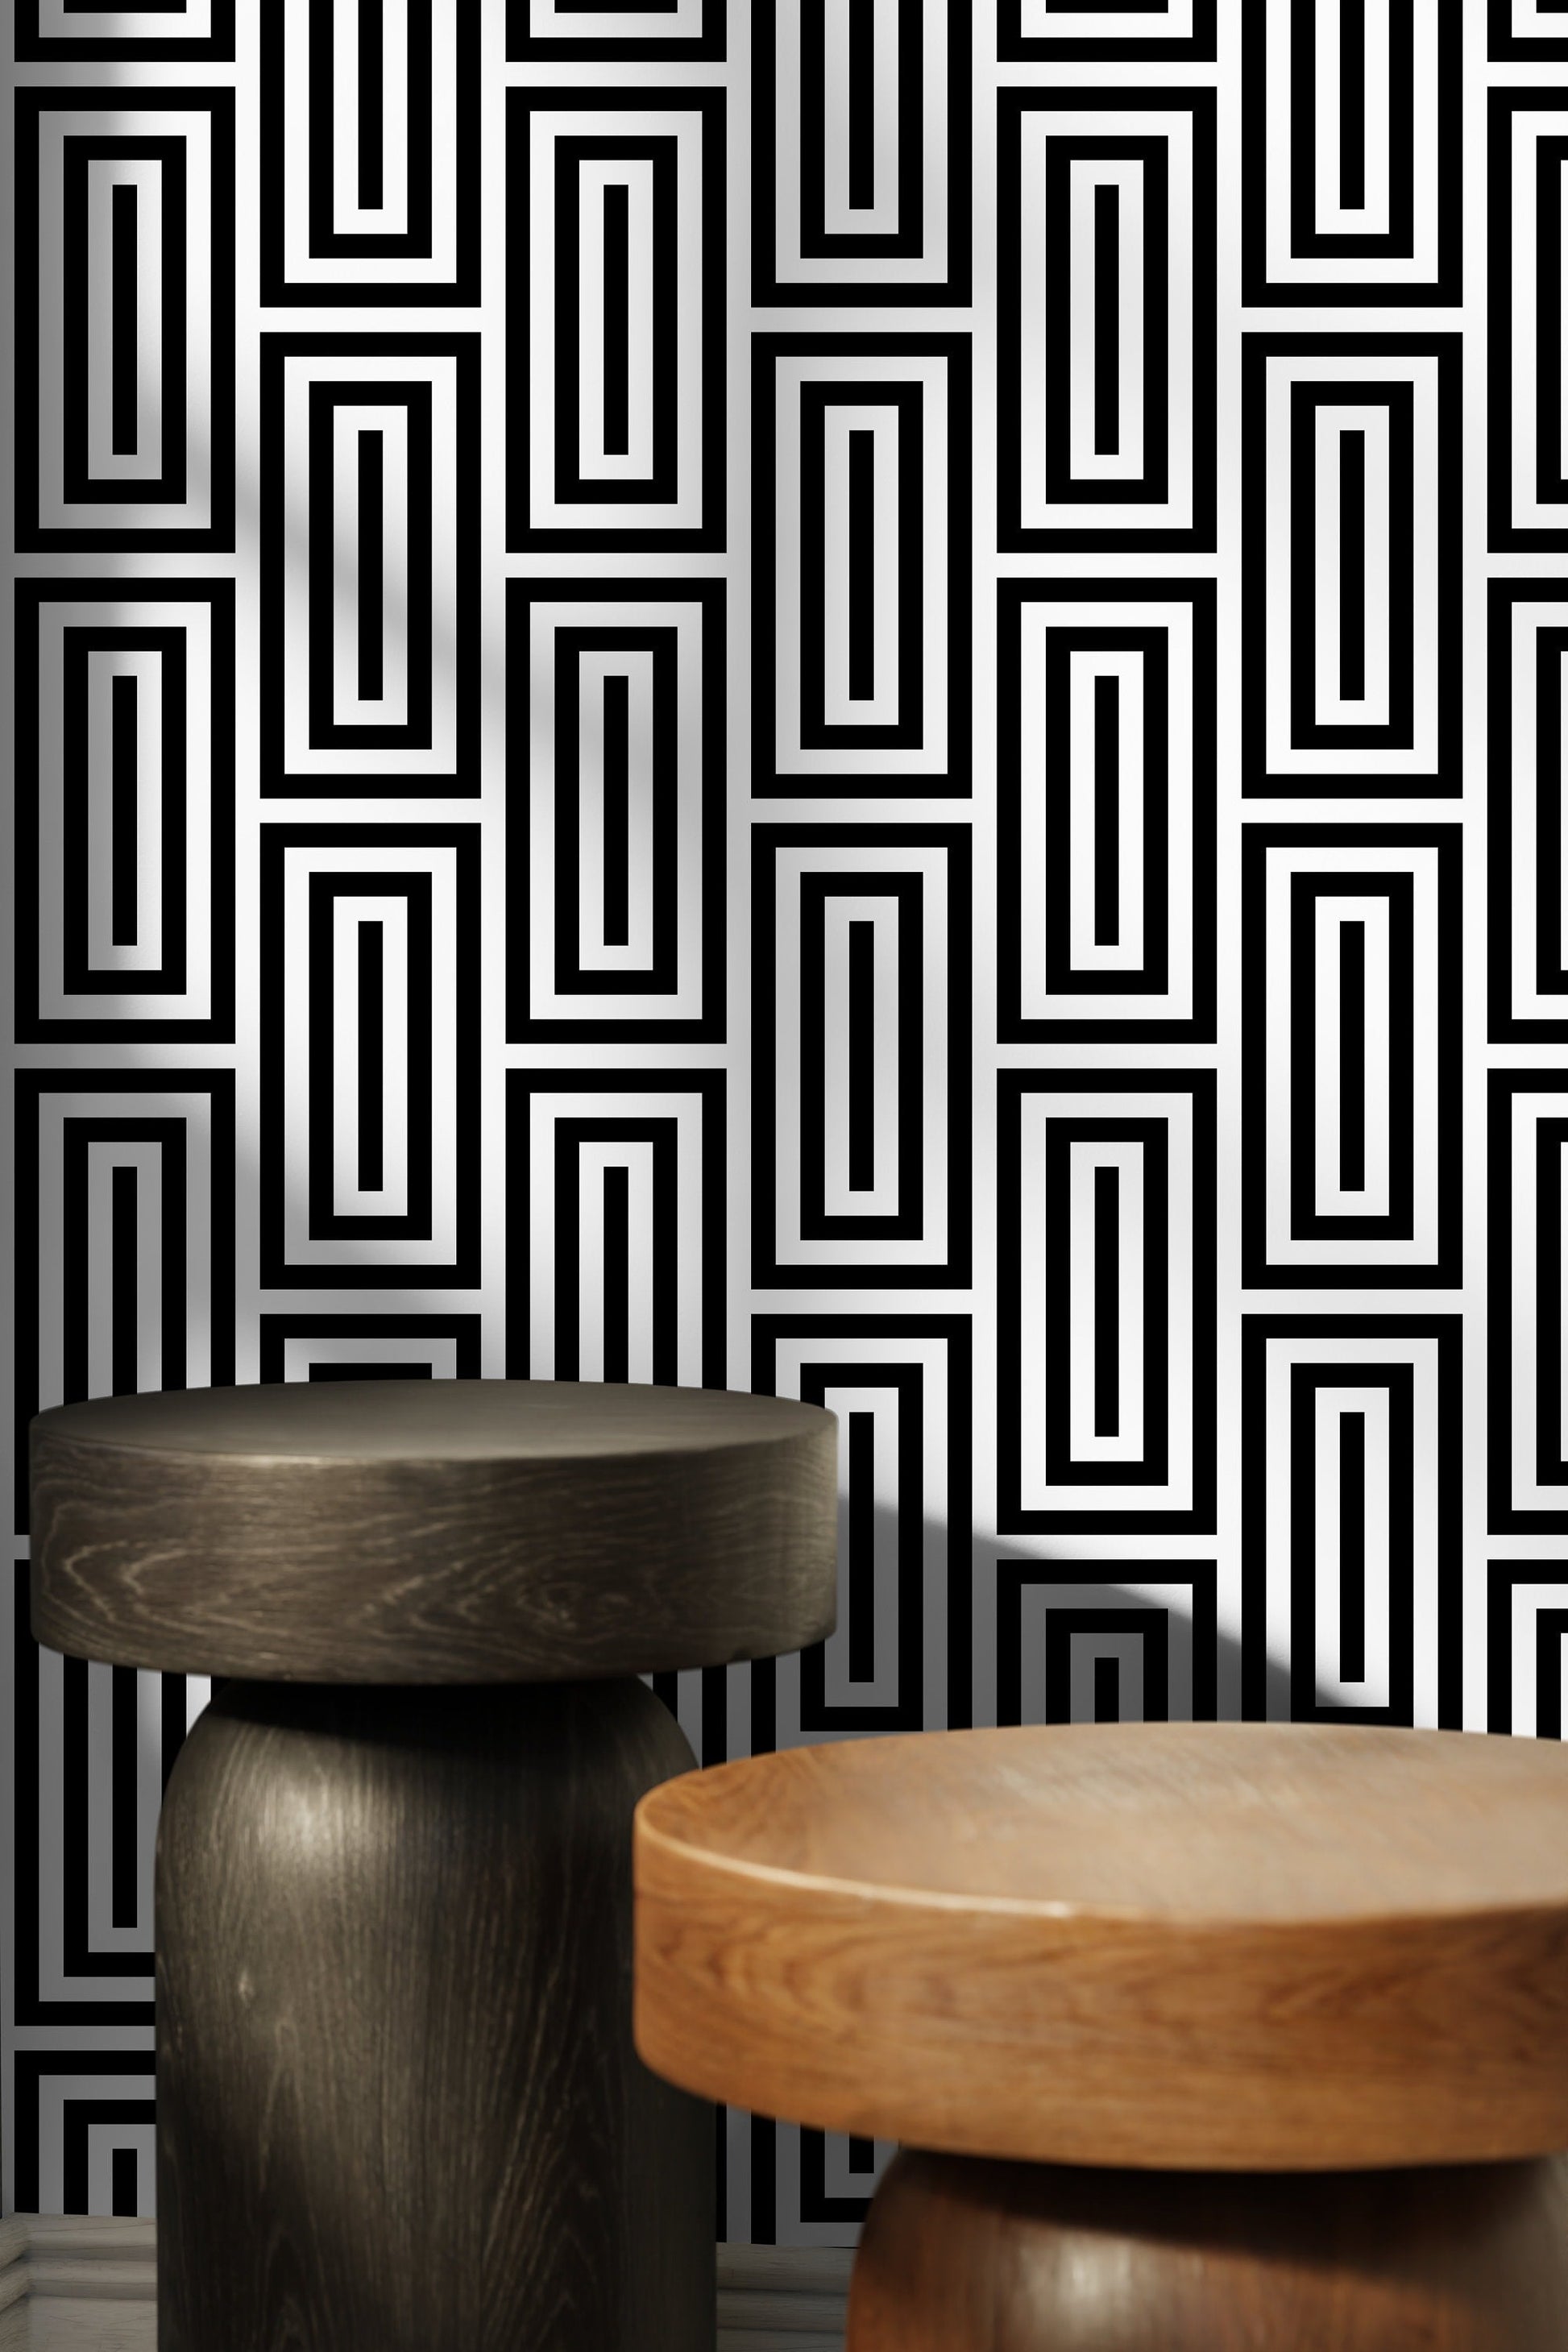 Black and White Wallpaper Geometric Peel and Stick Wallpaper Removable Wallpaper Contemporary Wall Mural Temporary Wallpaper - B098